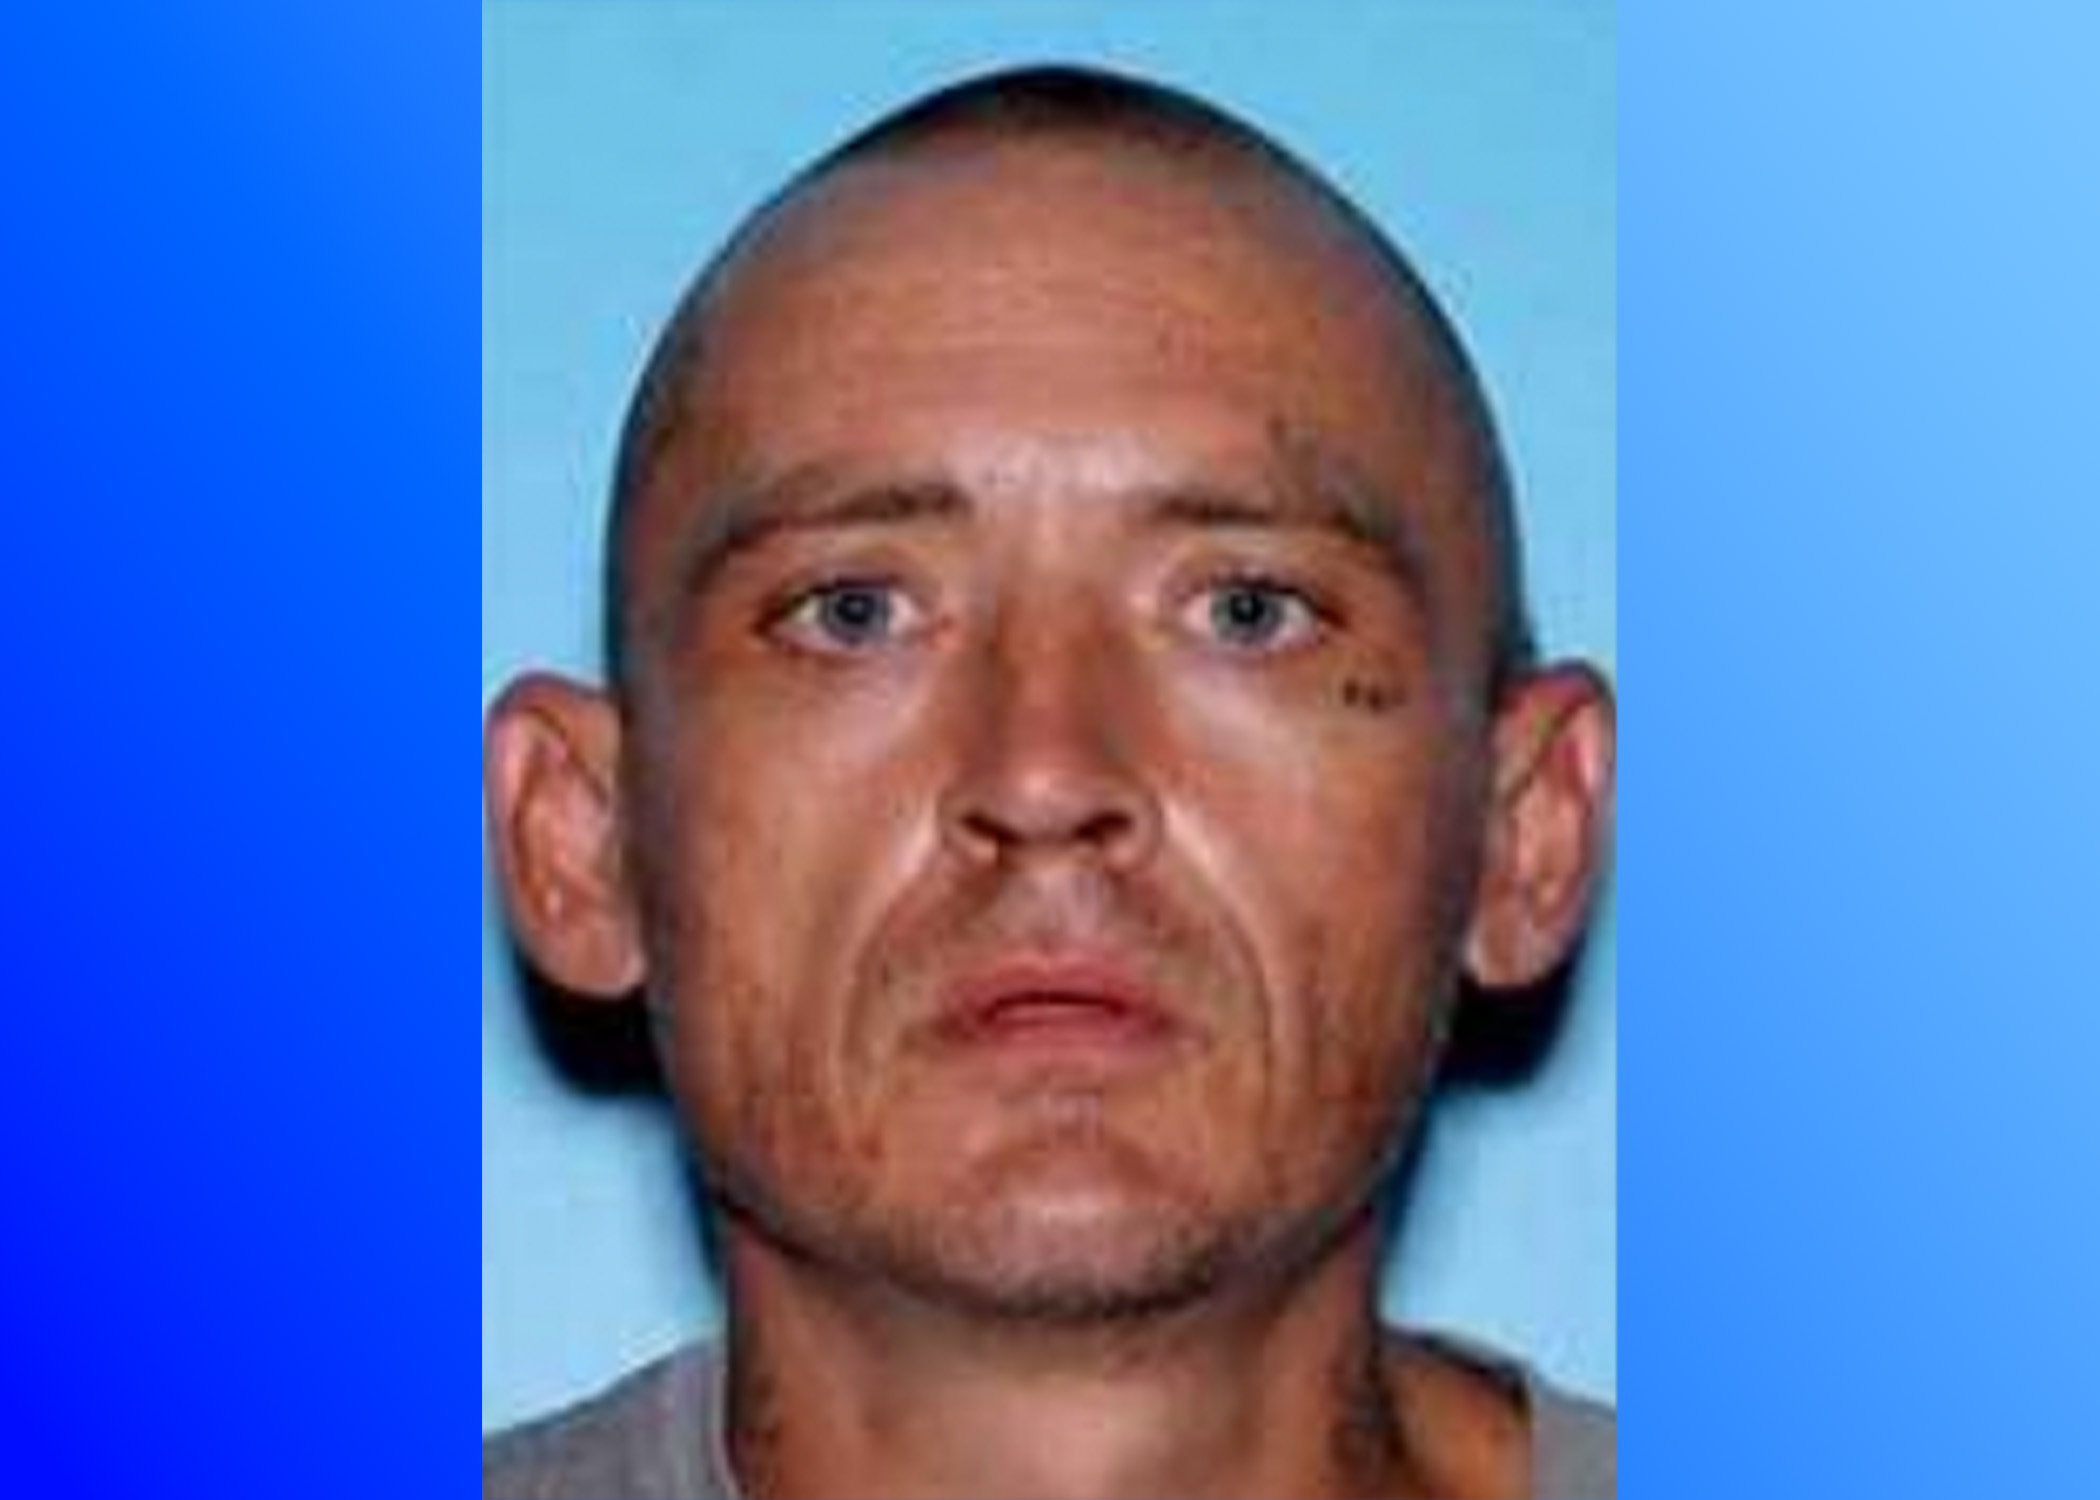 CANCELED: Missing and Endangered Person Alert issued for 43-year-old man